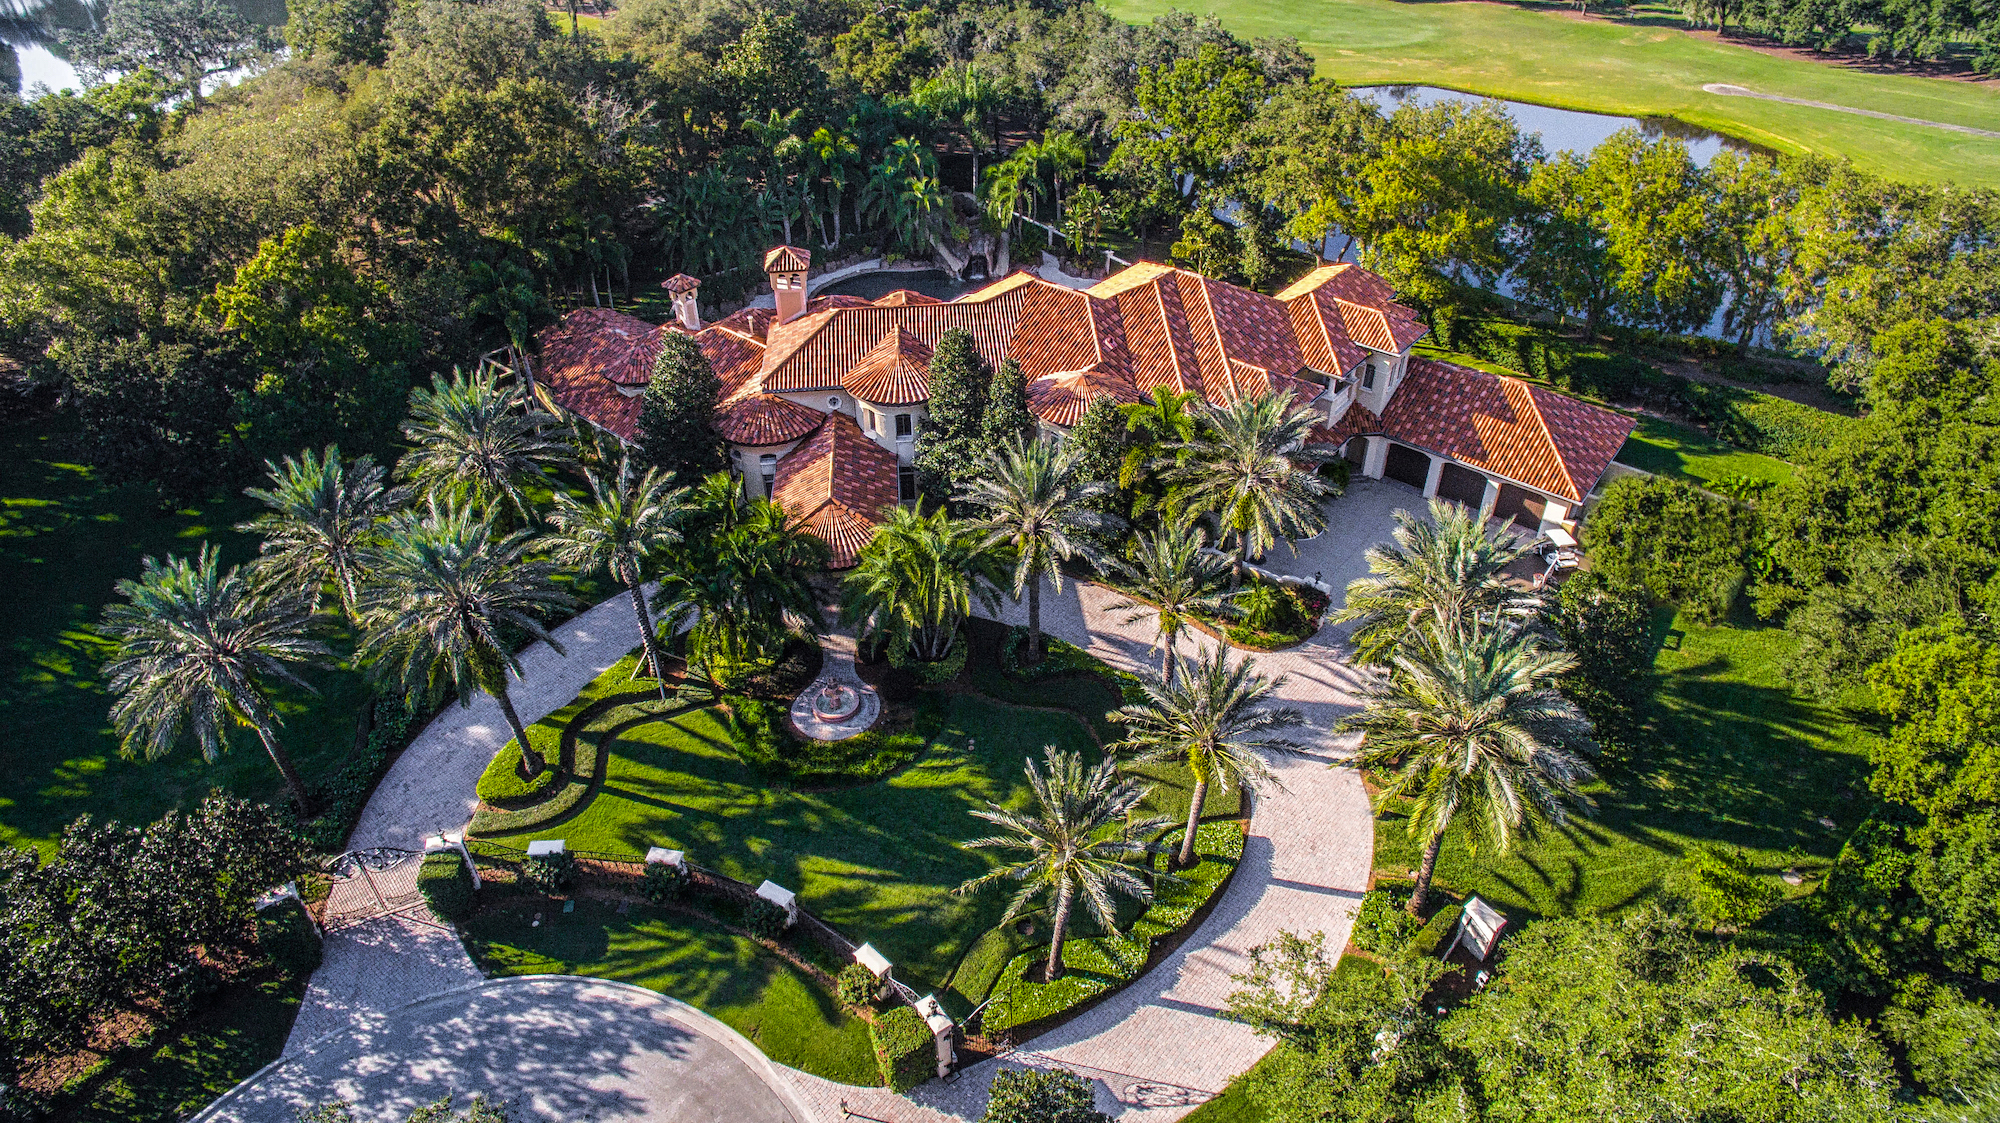 Courtesy. The property at 16814 Avila Blvd. in Tampa is listed for $3.997 million by Michelle Fitz-Randolph and Jennifer Zales of Coldwell Banker Realty.